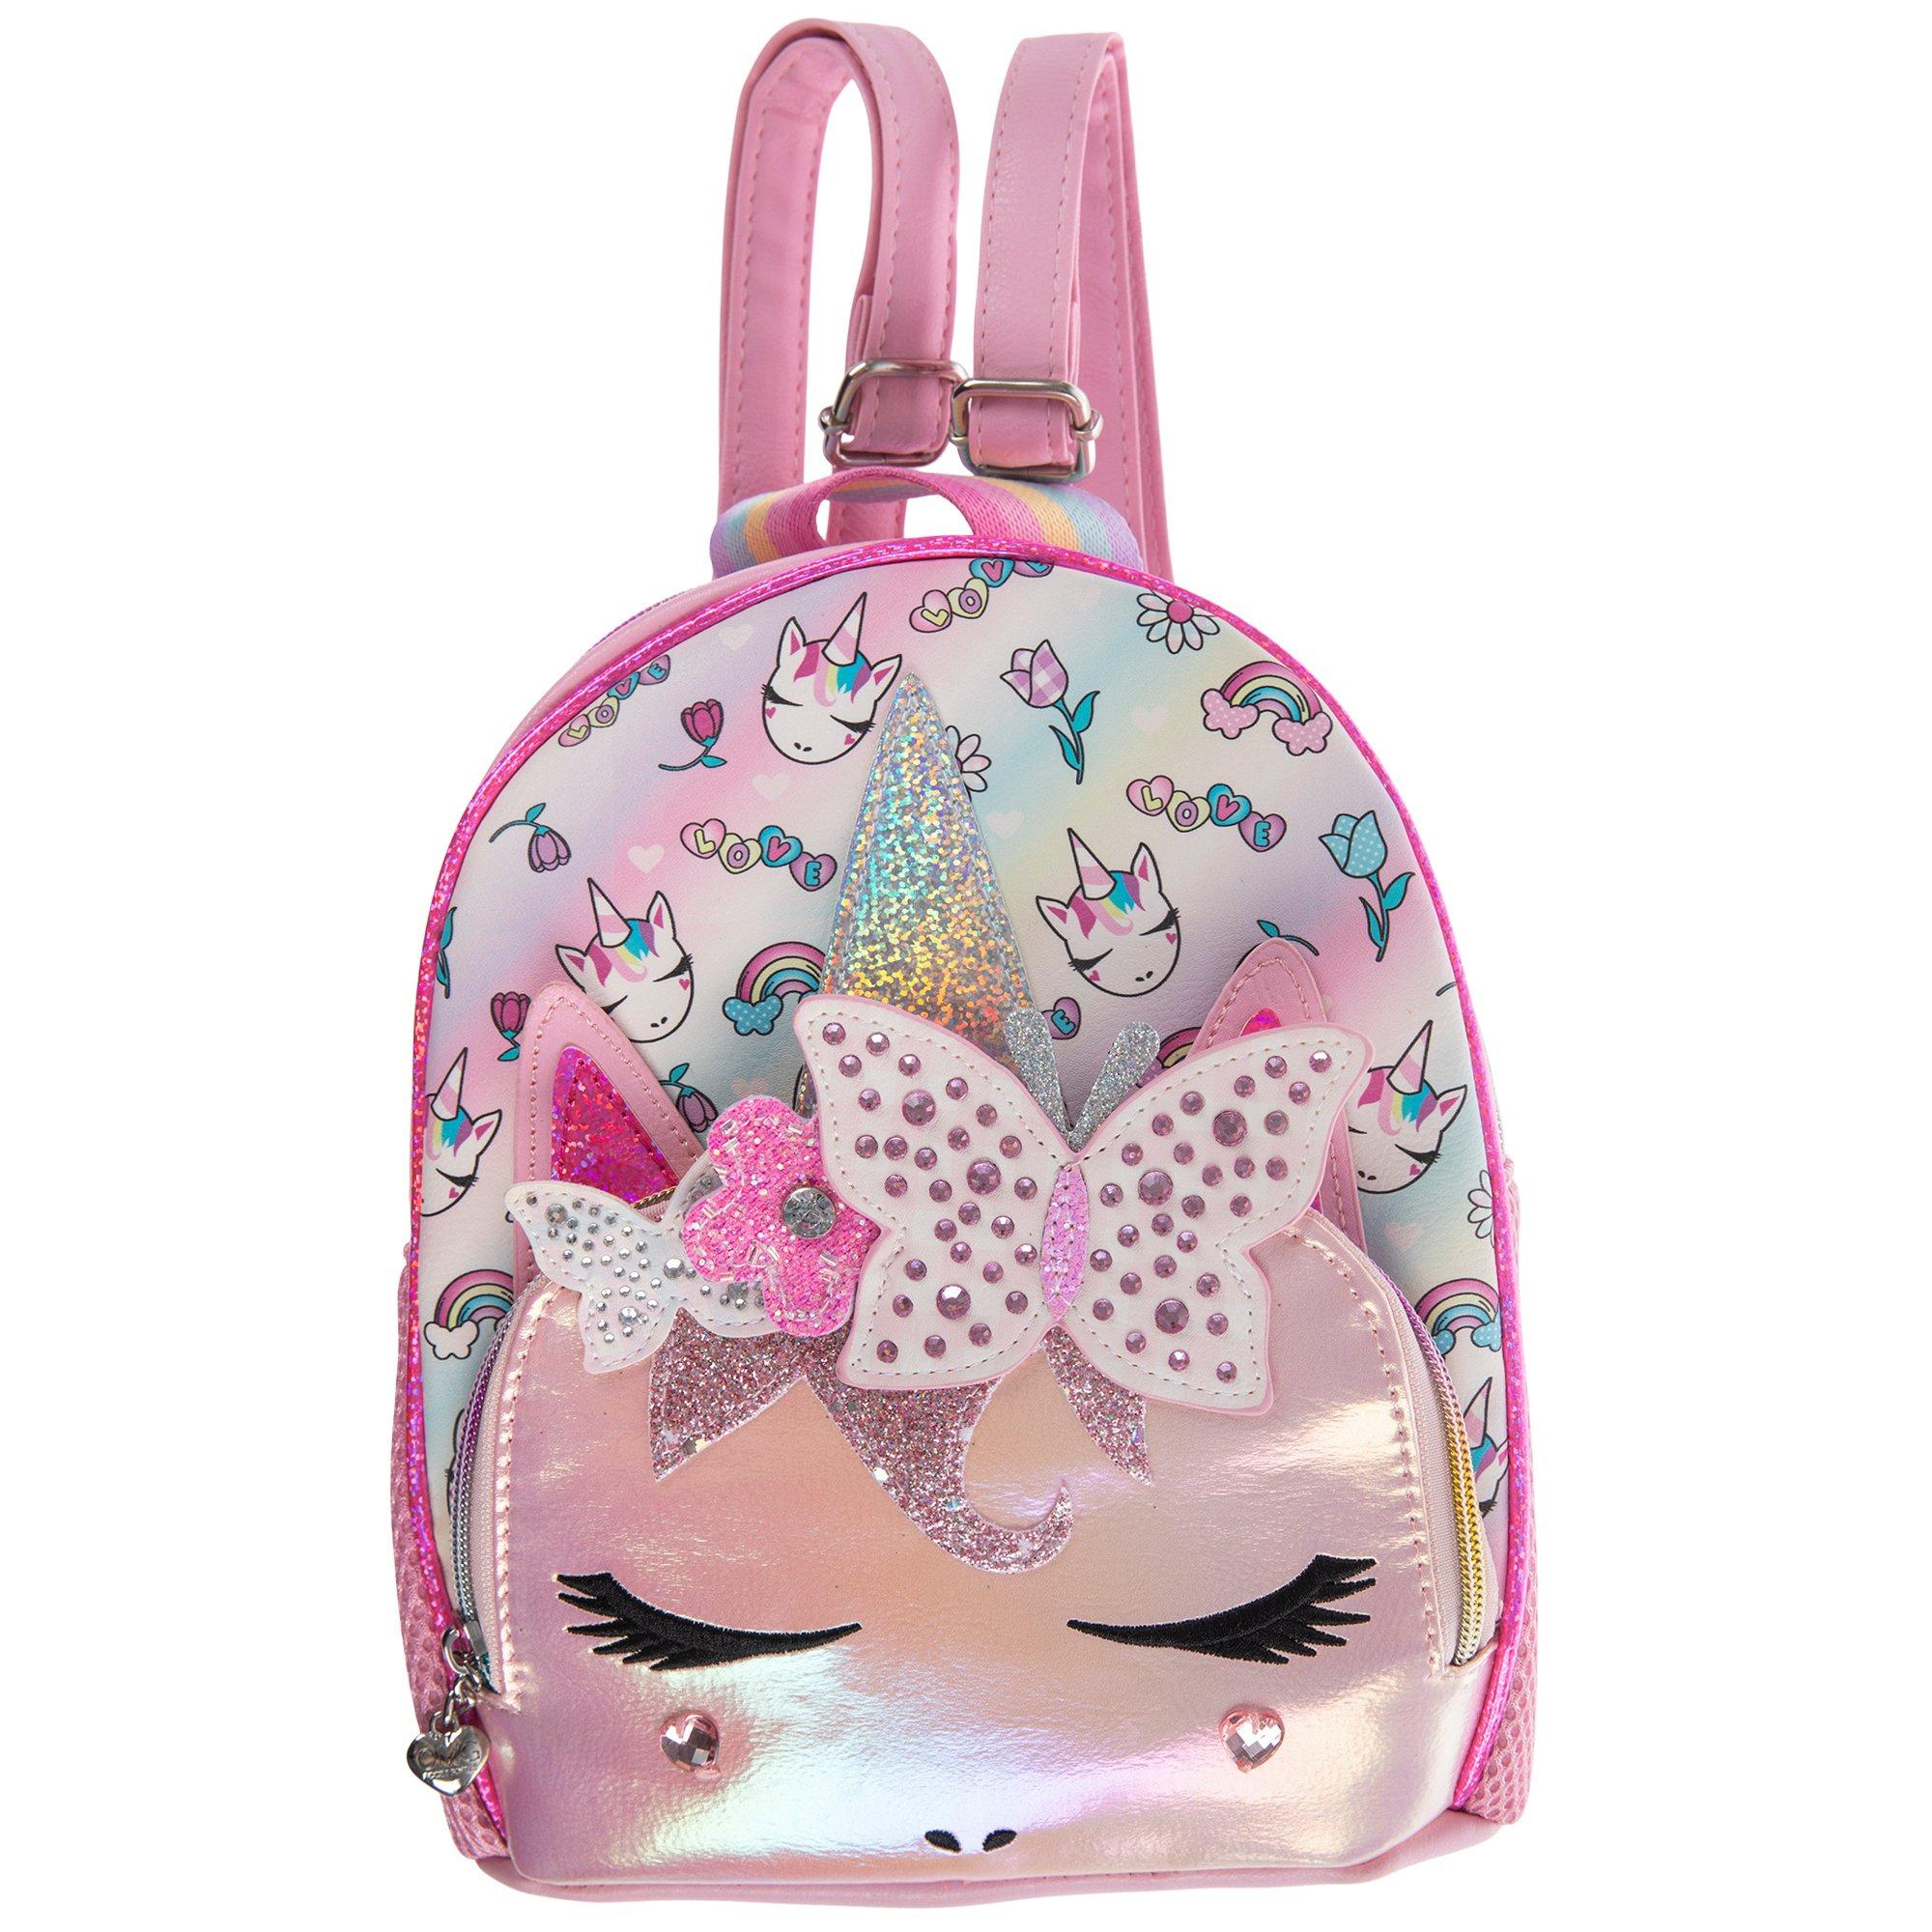 Mini Patterned Iridescent Backpack Keychain